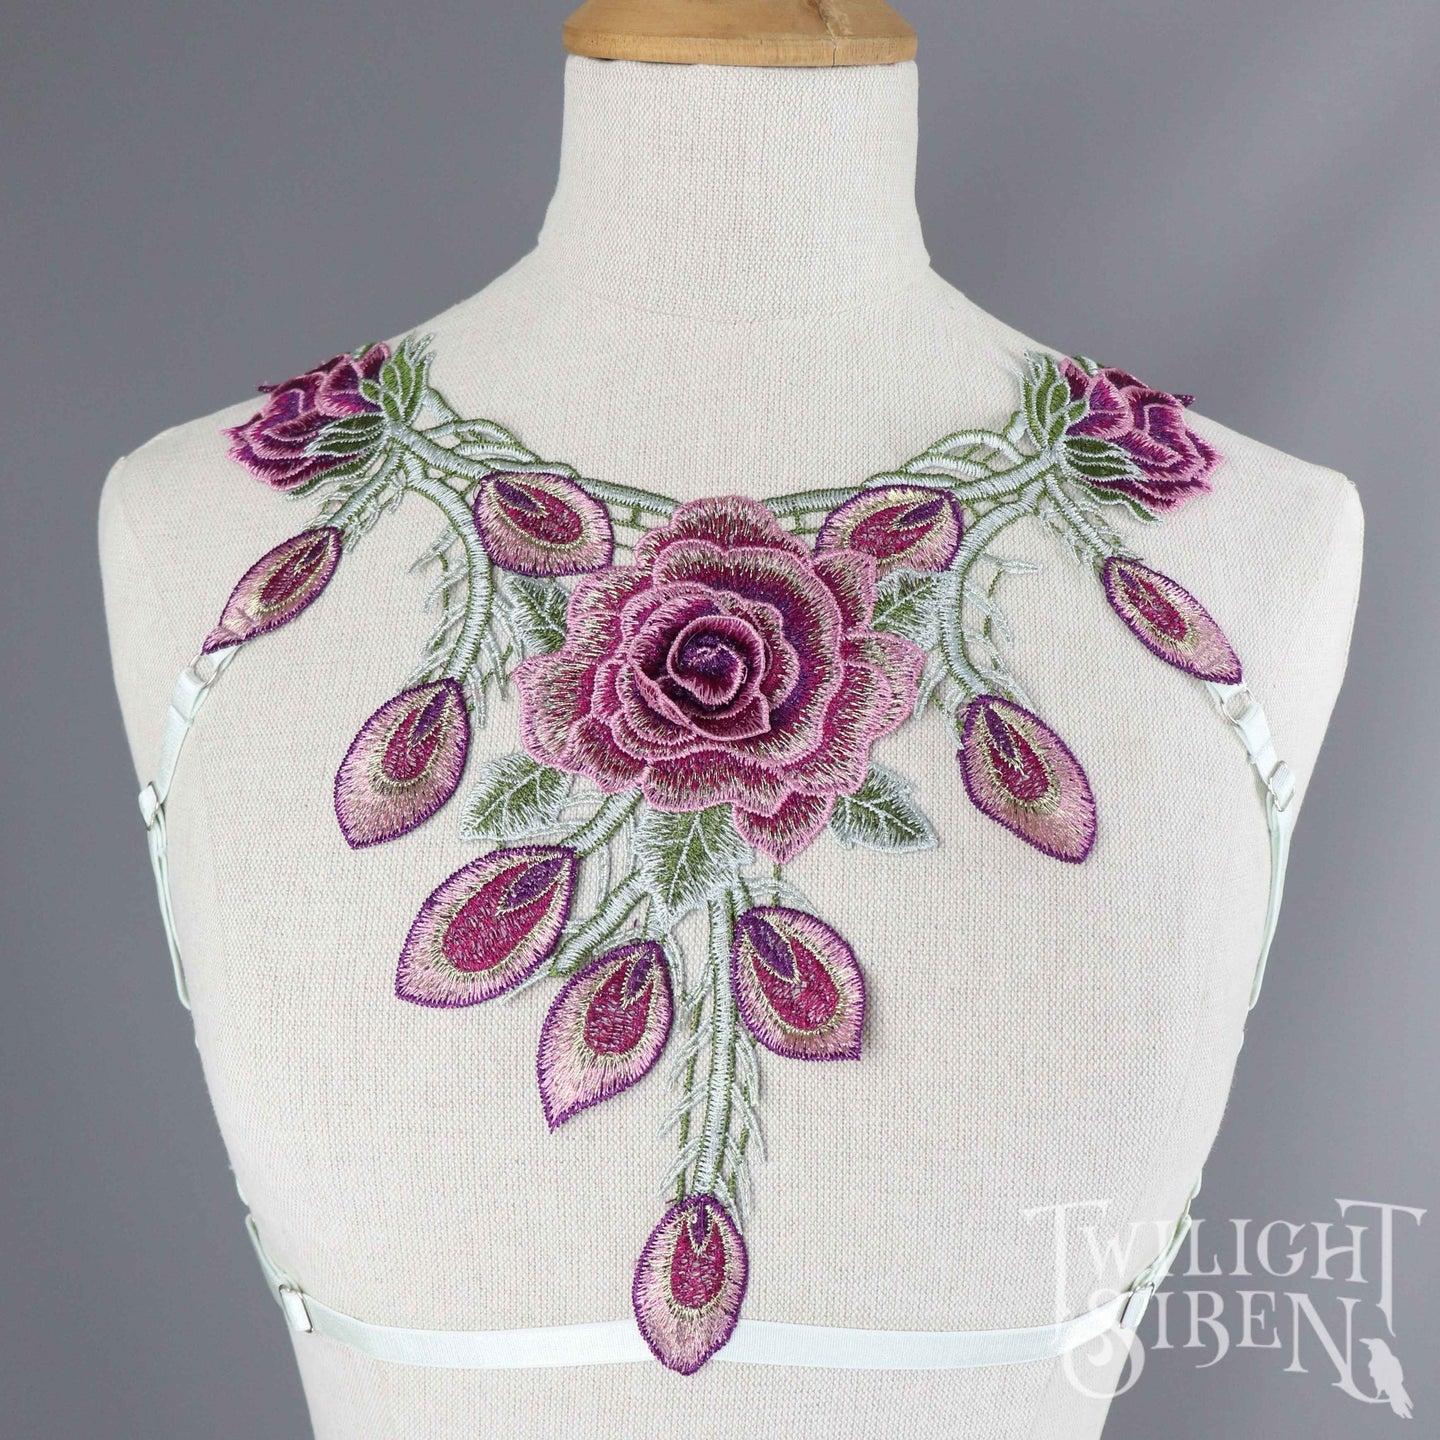 PURPLE FLORAL LACE BODY HARNESS BRALET